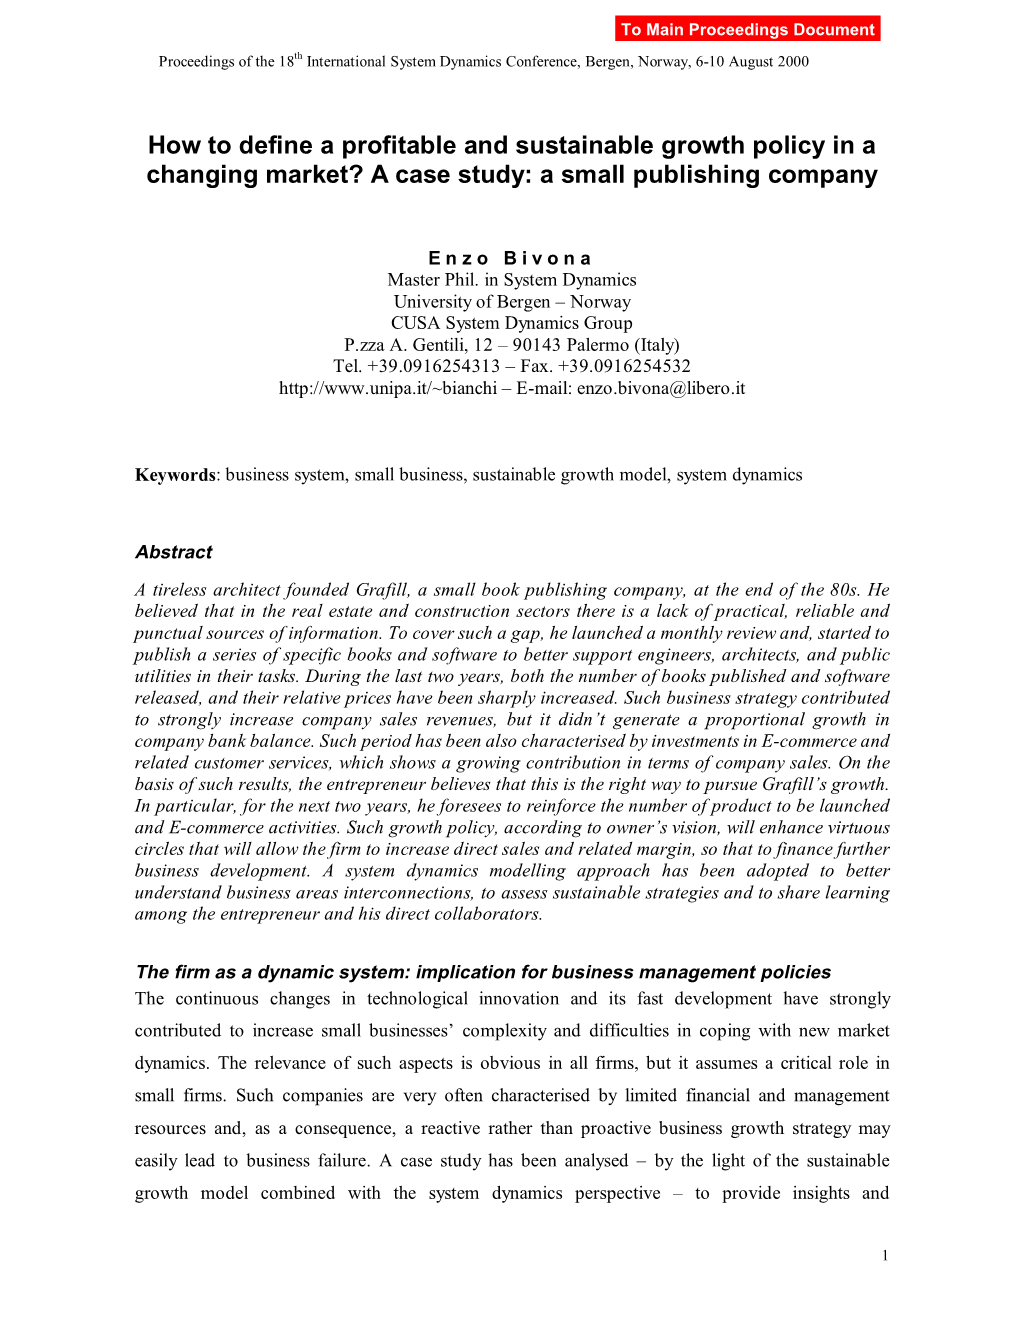 How to Define a Profitable and Sustainable Growth Policy in a Changing Market? a Case Study: a Small Publishing Company